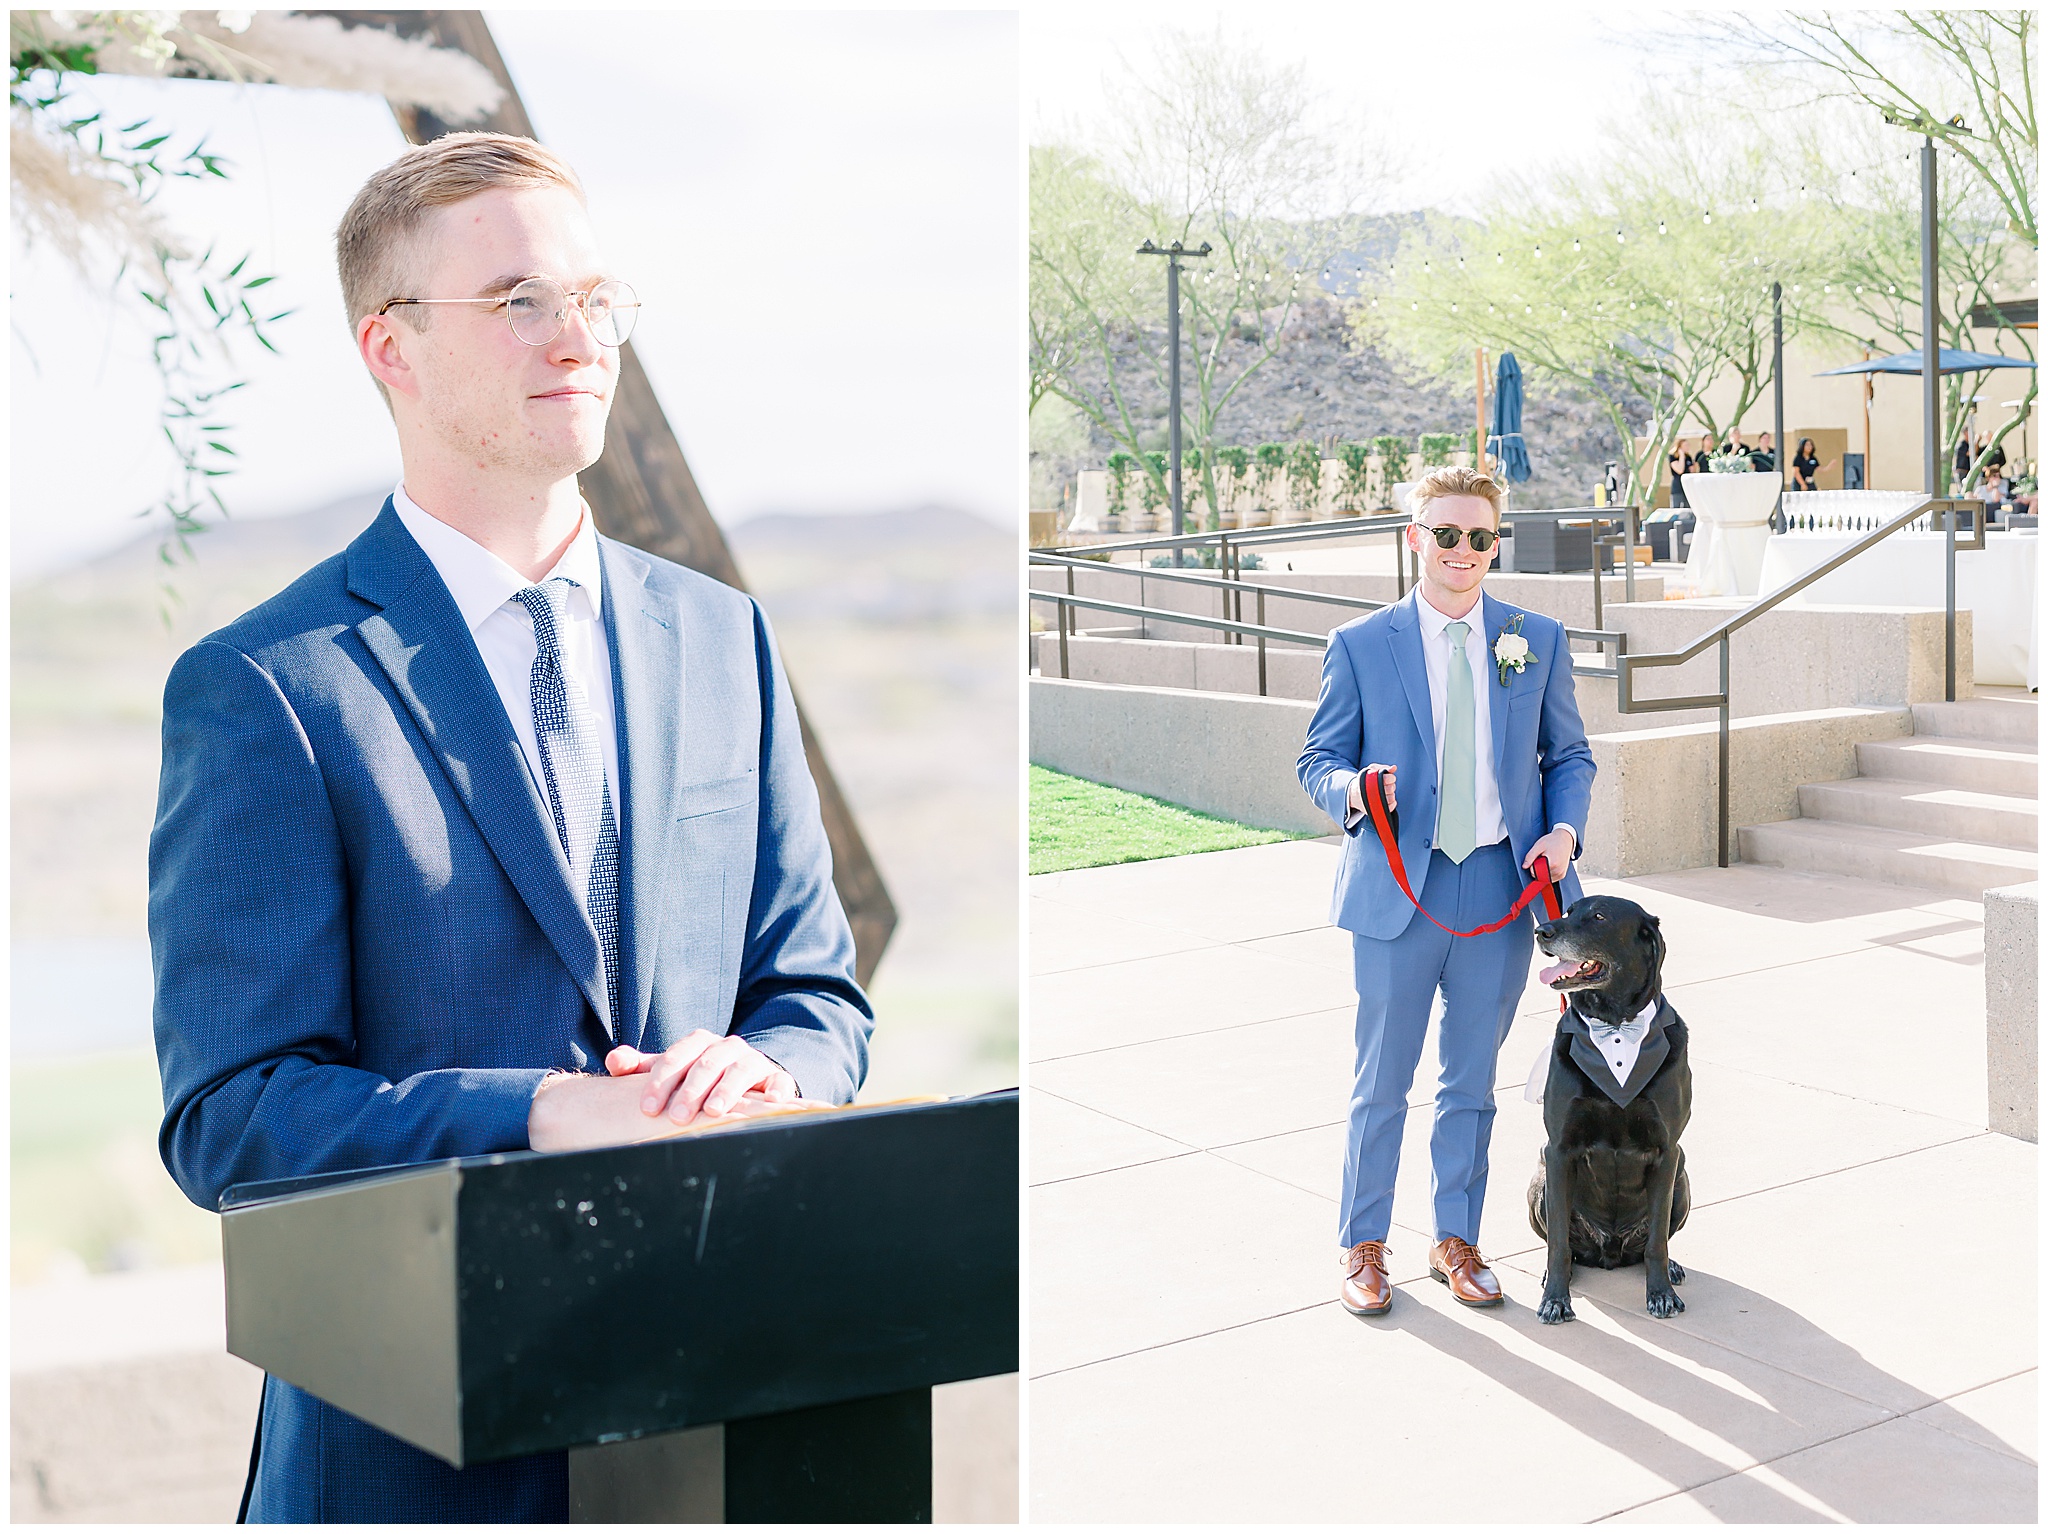 Officiant at Pulpit, Groomsman with Dog